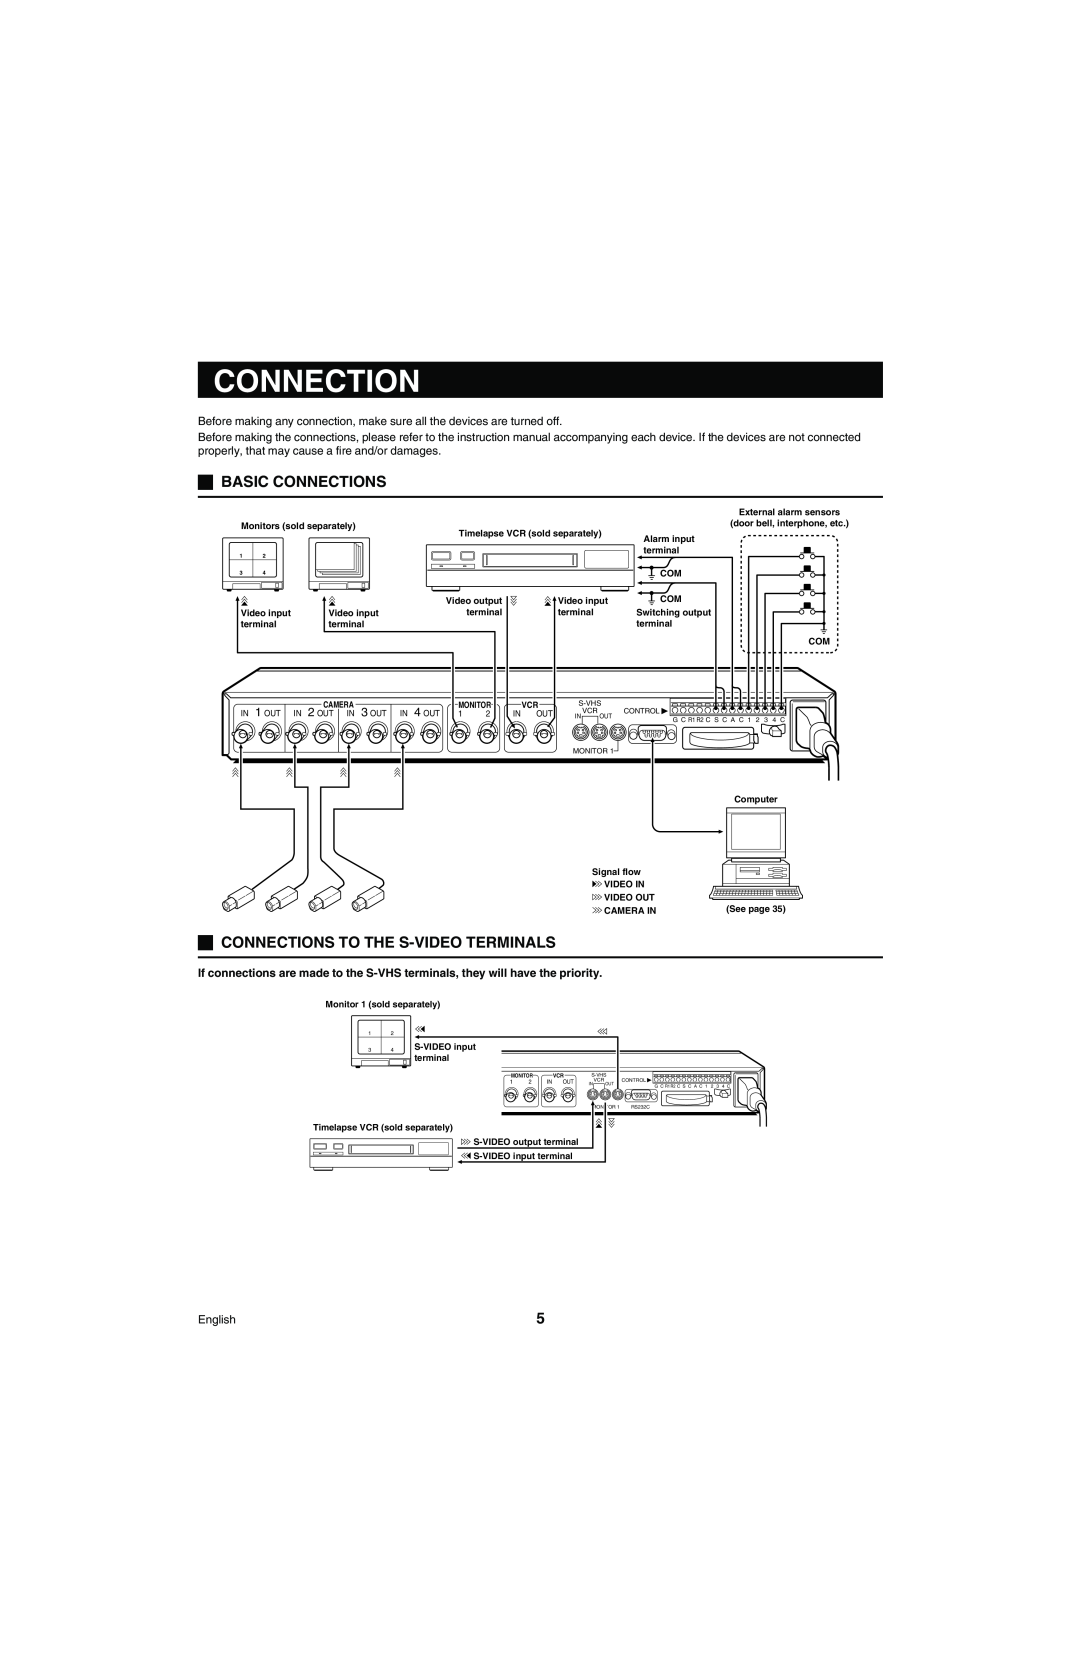 Sanyo MPX-MD4 instruction manual Basic Connections, Connections To The S-Videoterminals 